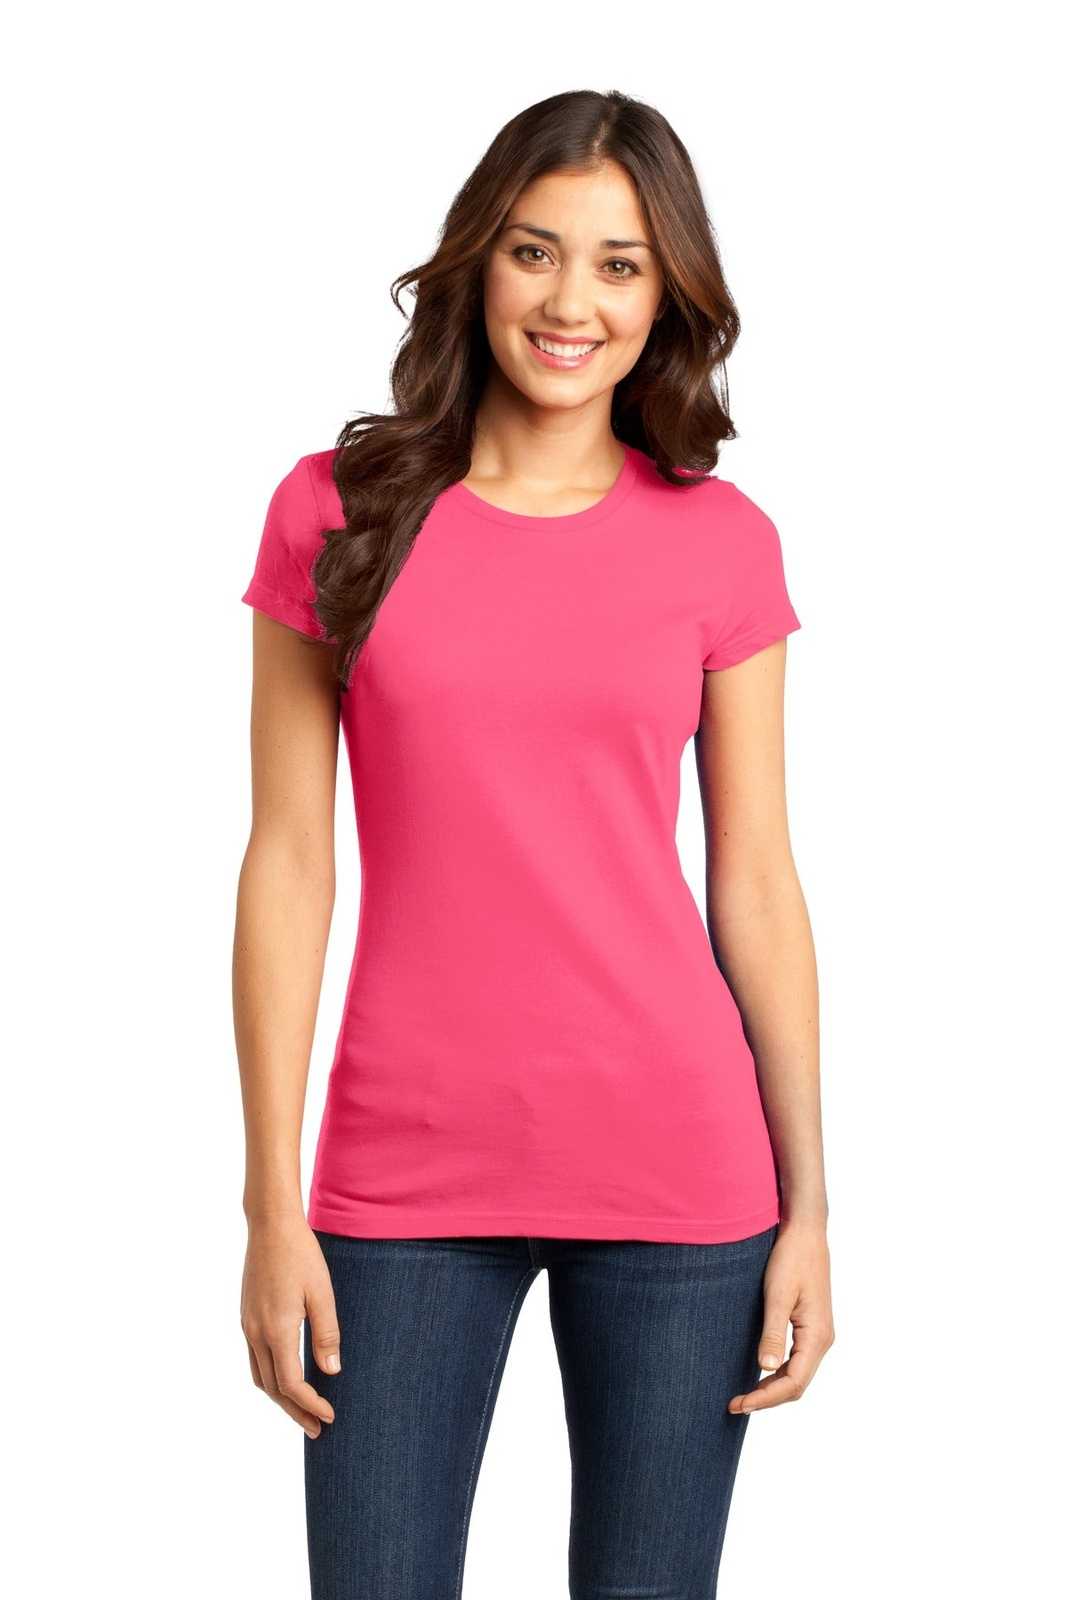 District DT6001 Women's Fitted Very Important Tee - Neon Pink - HIT a Double - 1